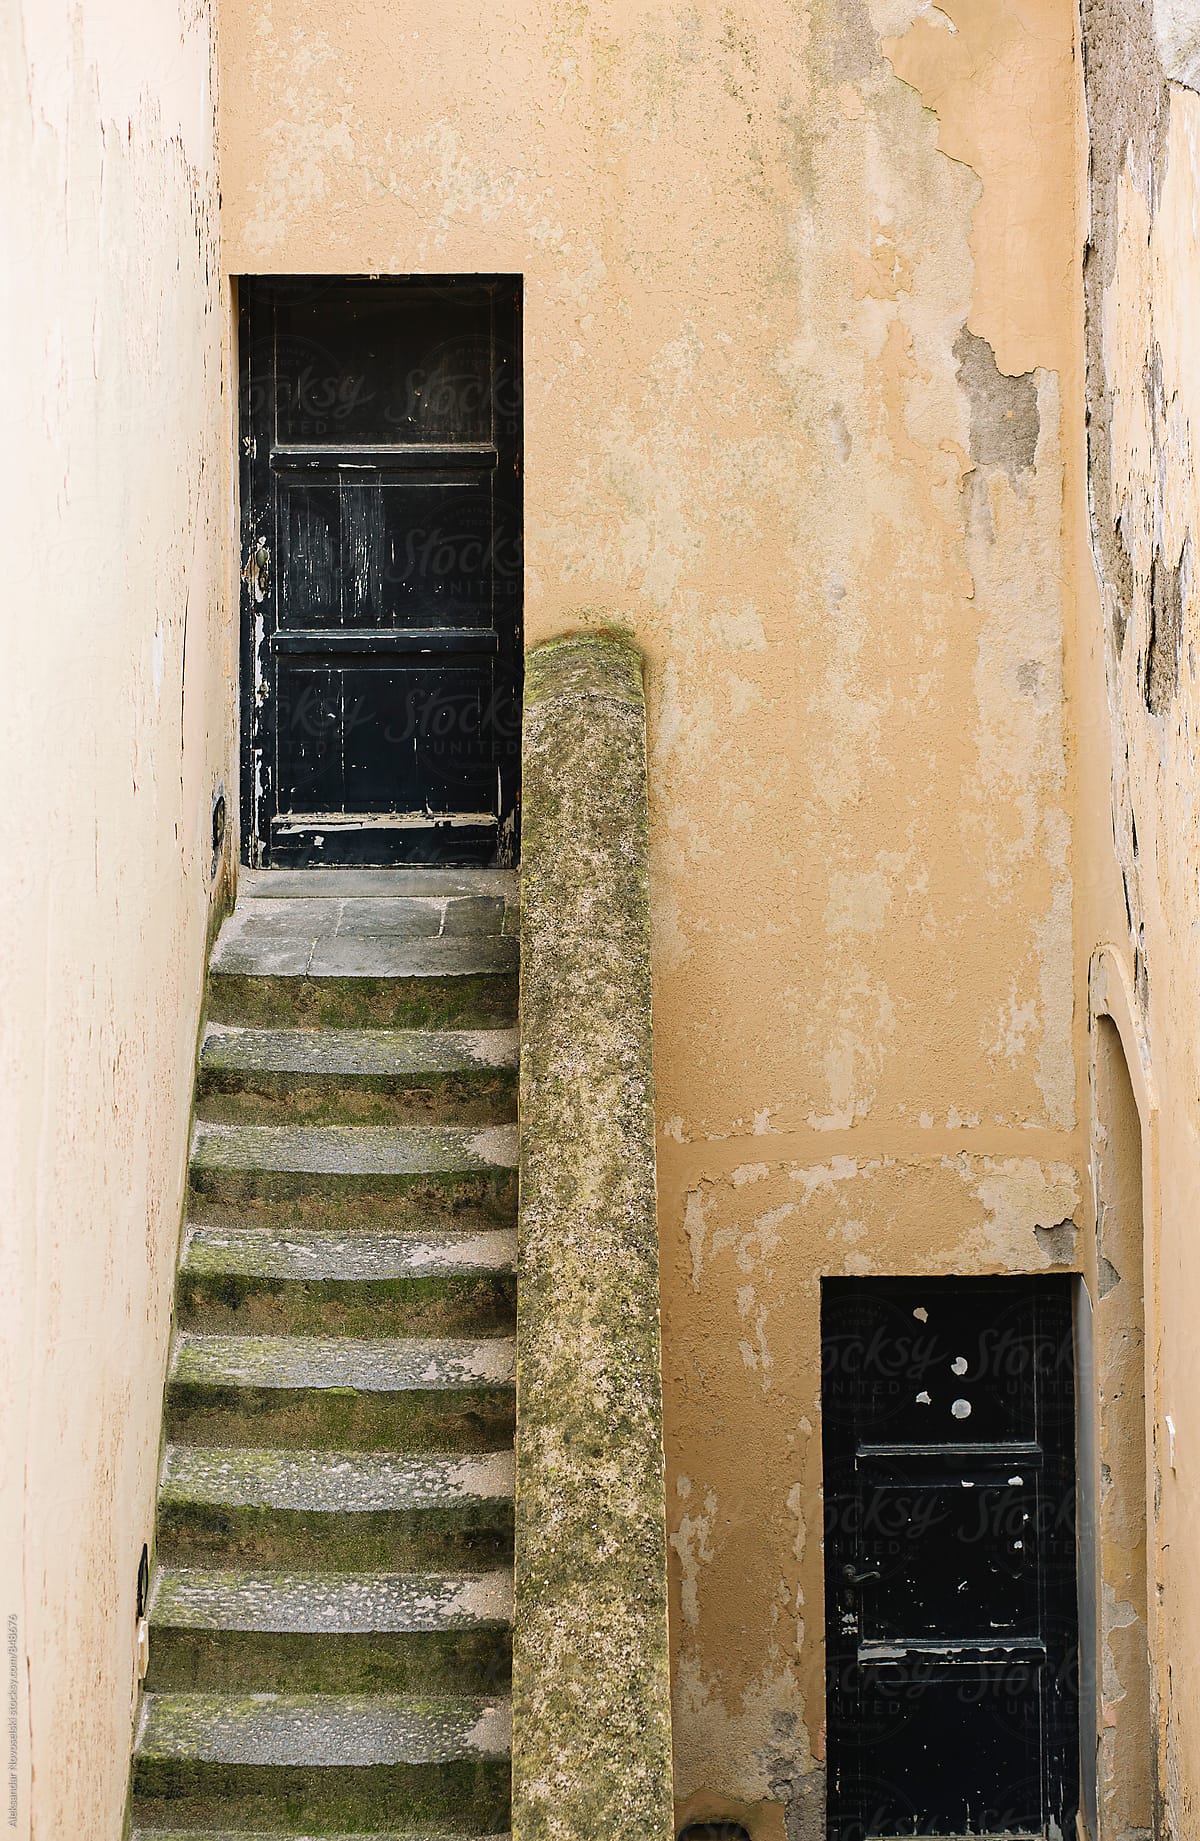 Minimalistic shot of two doors and stairs in Italy